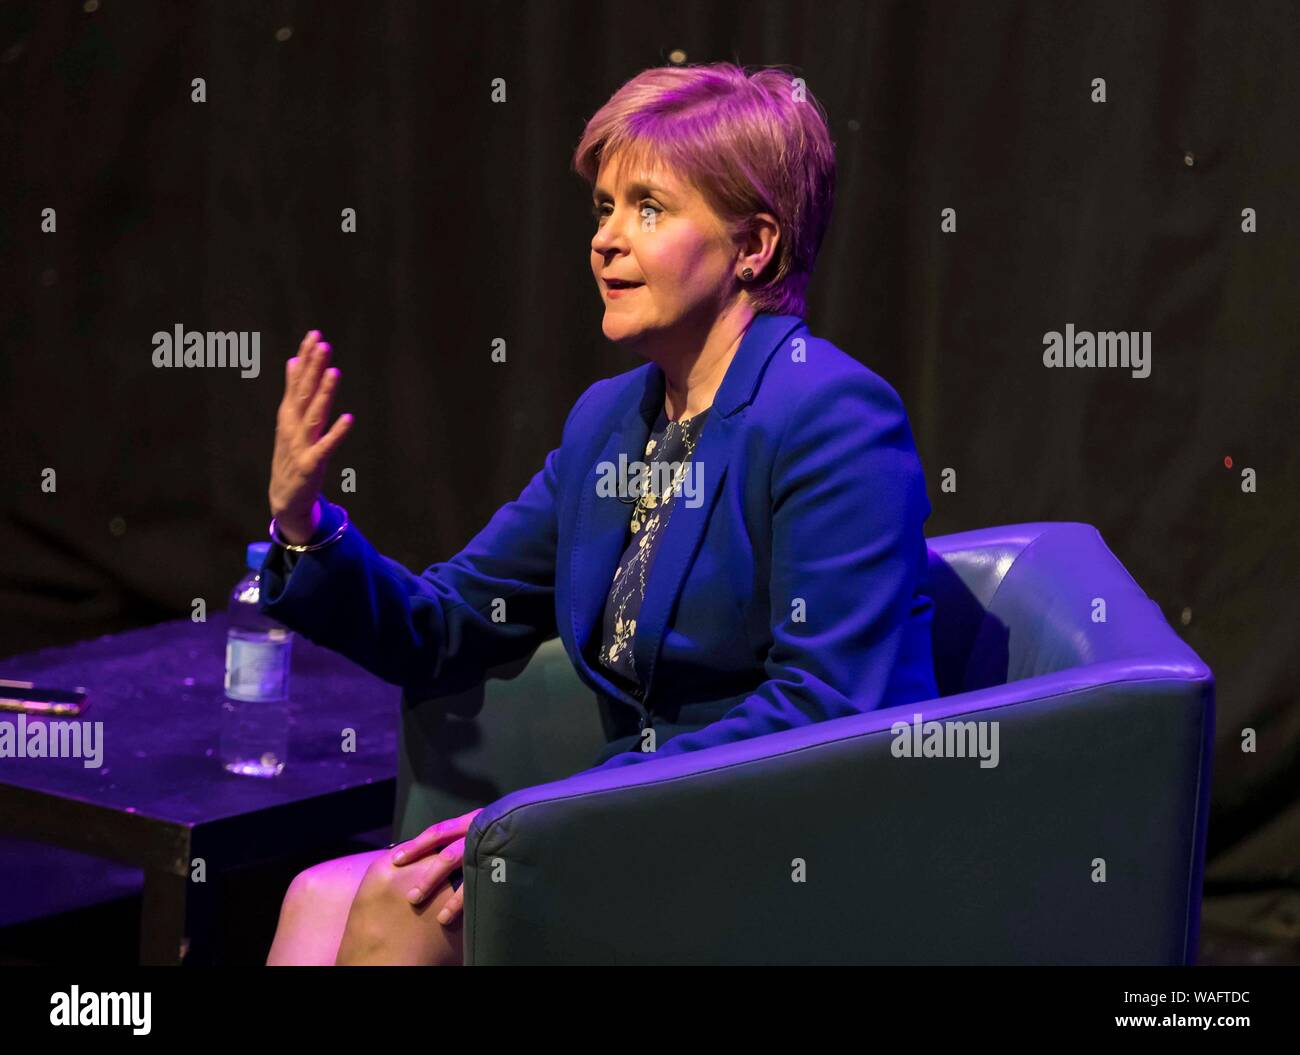 Edinburgh, Scotland, UK. 20th Aug, 2019. Scotland’s First Minister, Nicola Sturgeon, is interviewed by Matt Forde at the Edinburgh Fringe Festival.  During the hour long interview the FM said if the UK crashed out of the EU with No Deal that Jeremy Corbyn should shoulder part of the blame. Credit: Rich Dyson/Alamy Live News Stock Photo